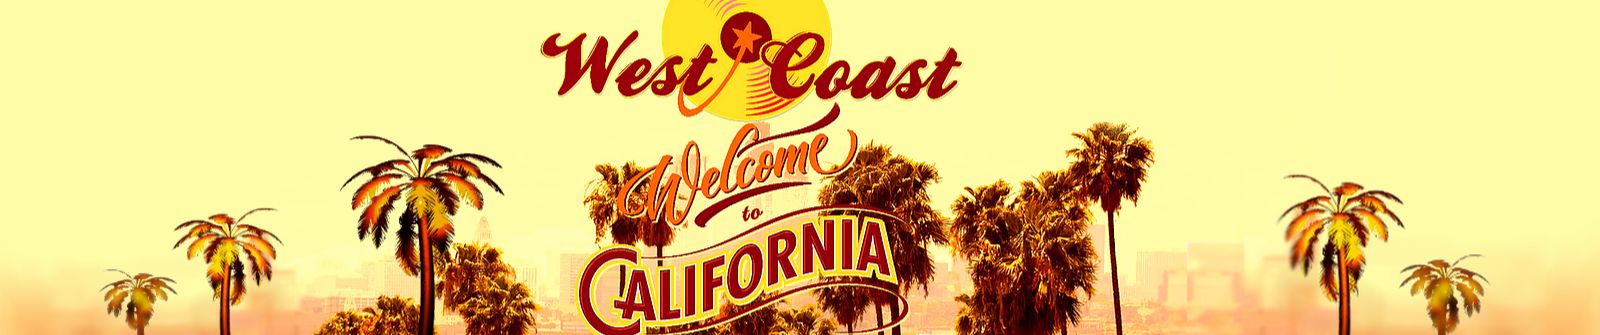 Stream West Coast Golden Radio music | Listen to songs, albums, playlists  for free on SoundCloud